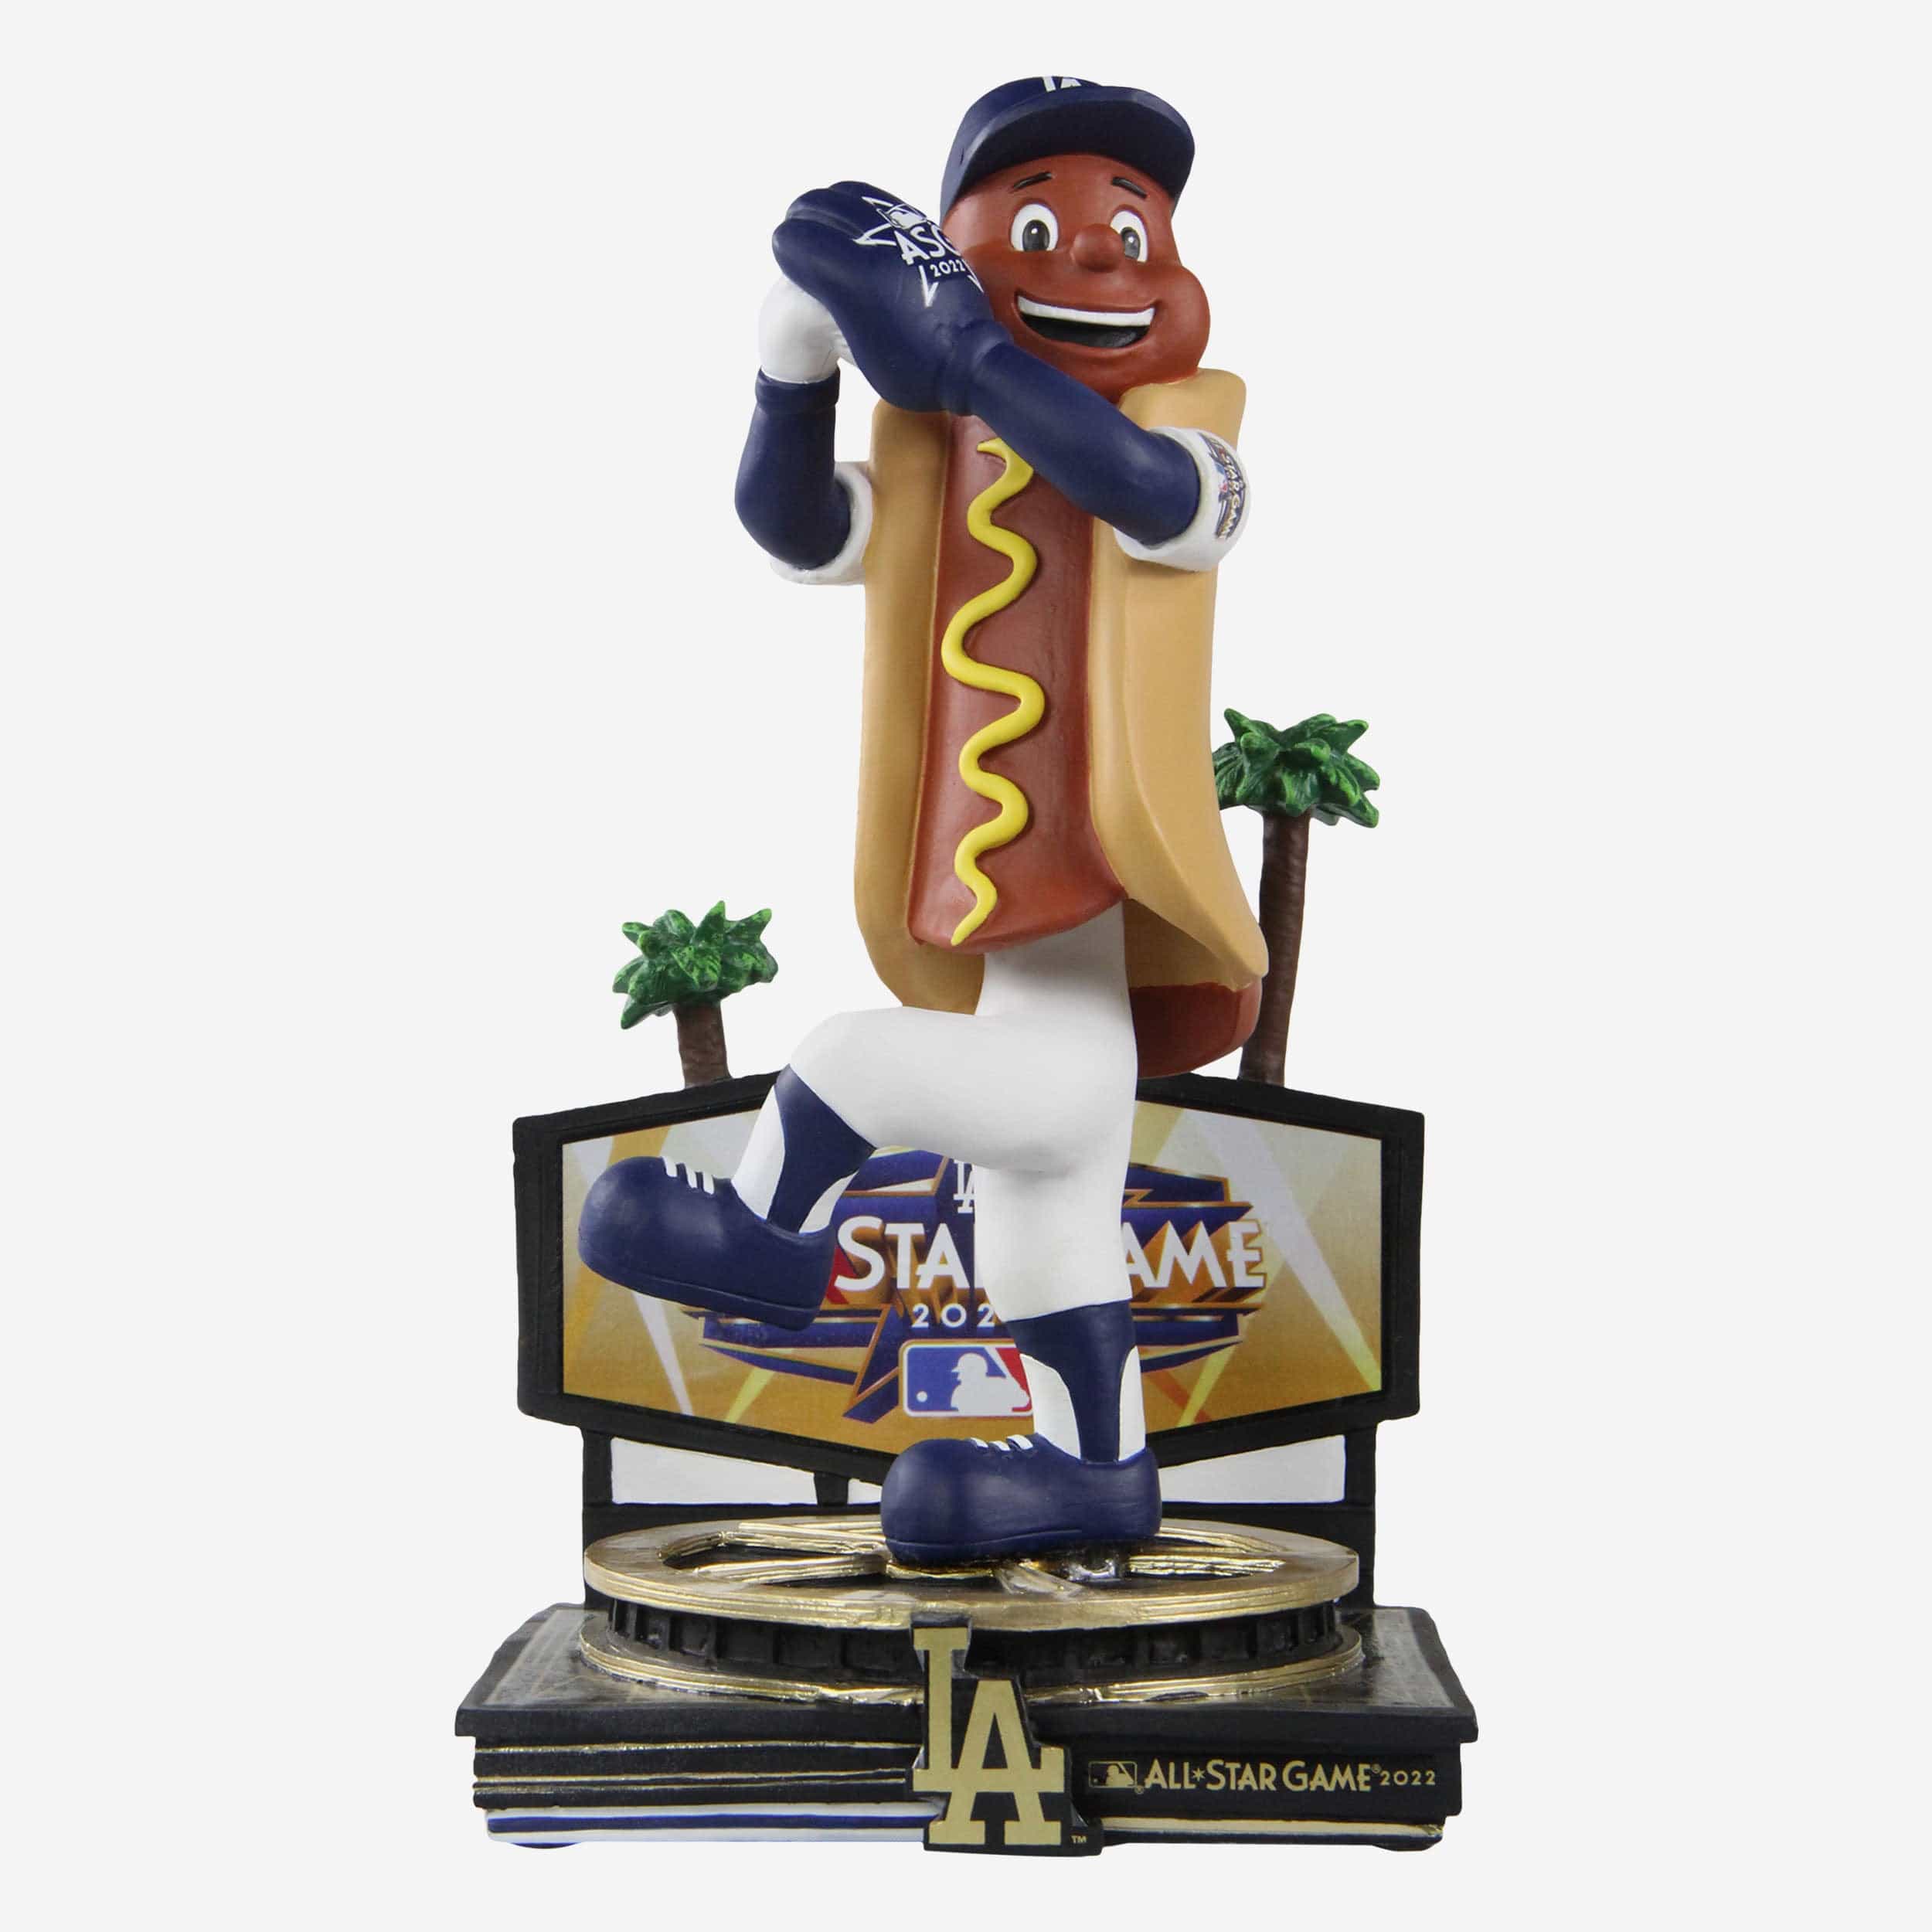 All Star Dogs: L.A. Clippers Pet apparel and accessories